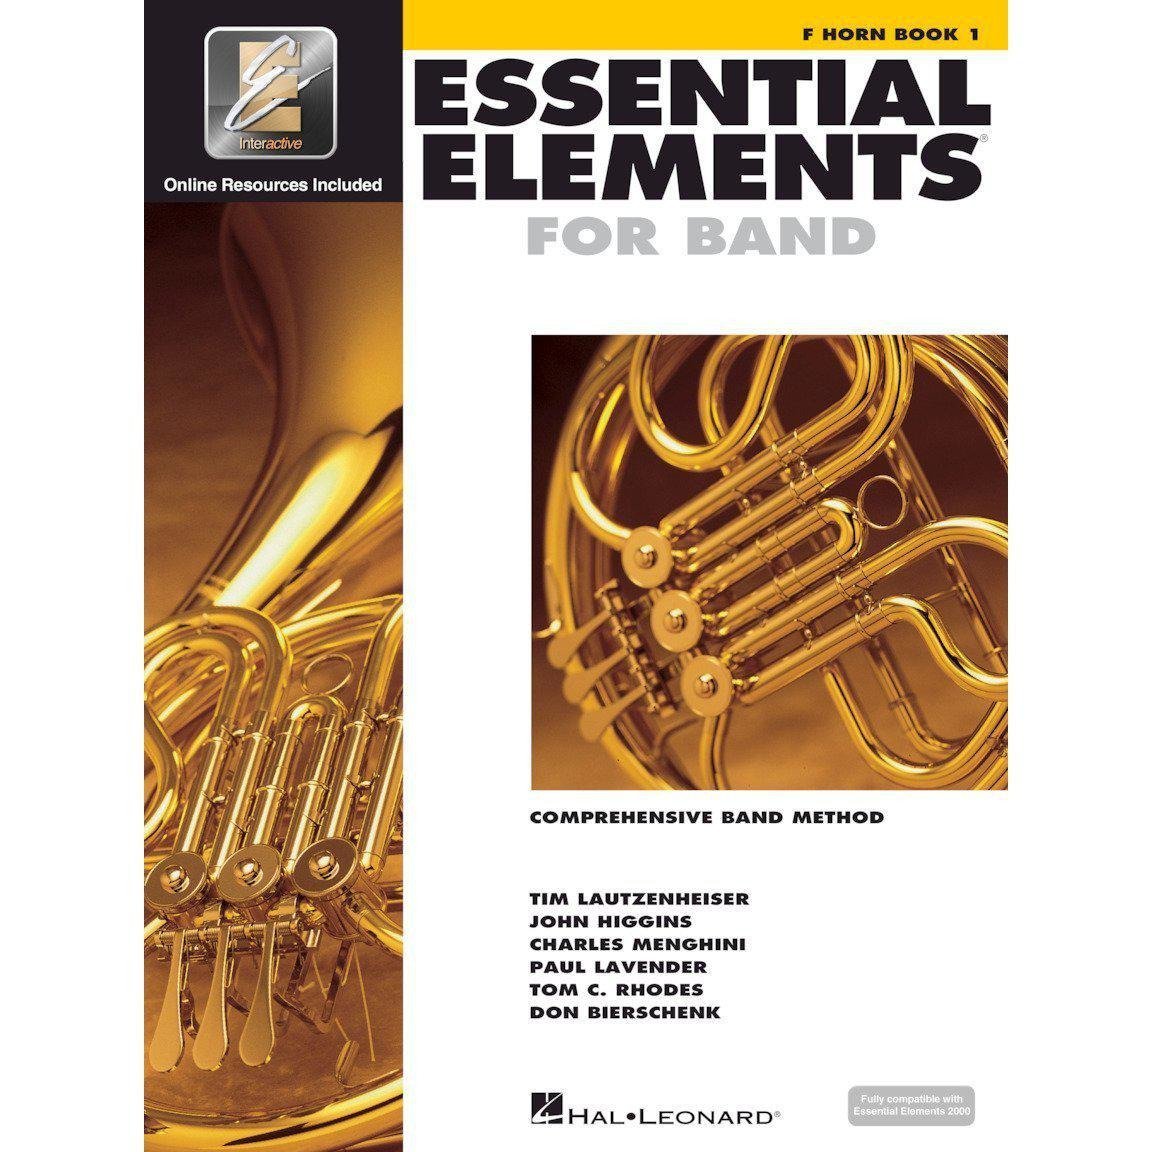 Essential Elements for Band Book 1-F Horn-Andy's Music